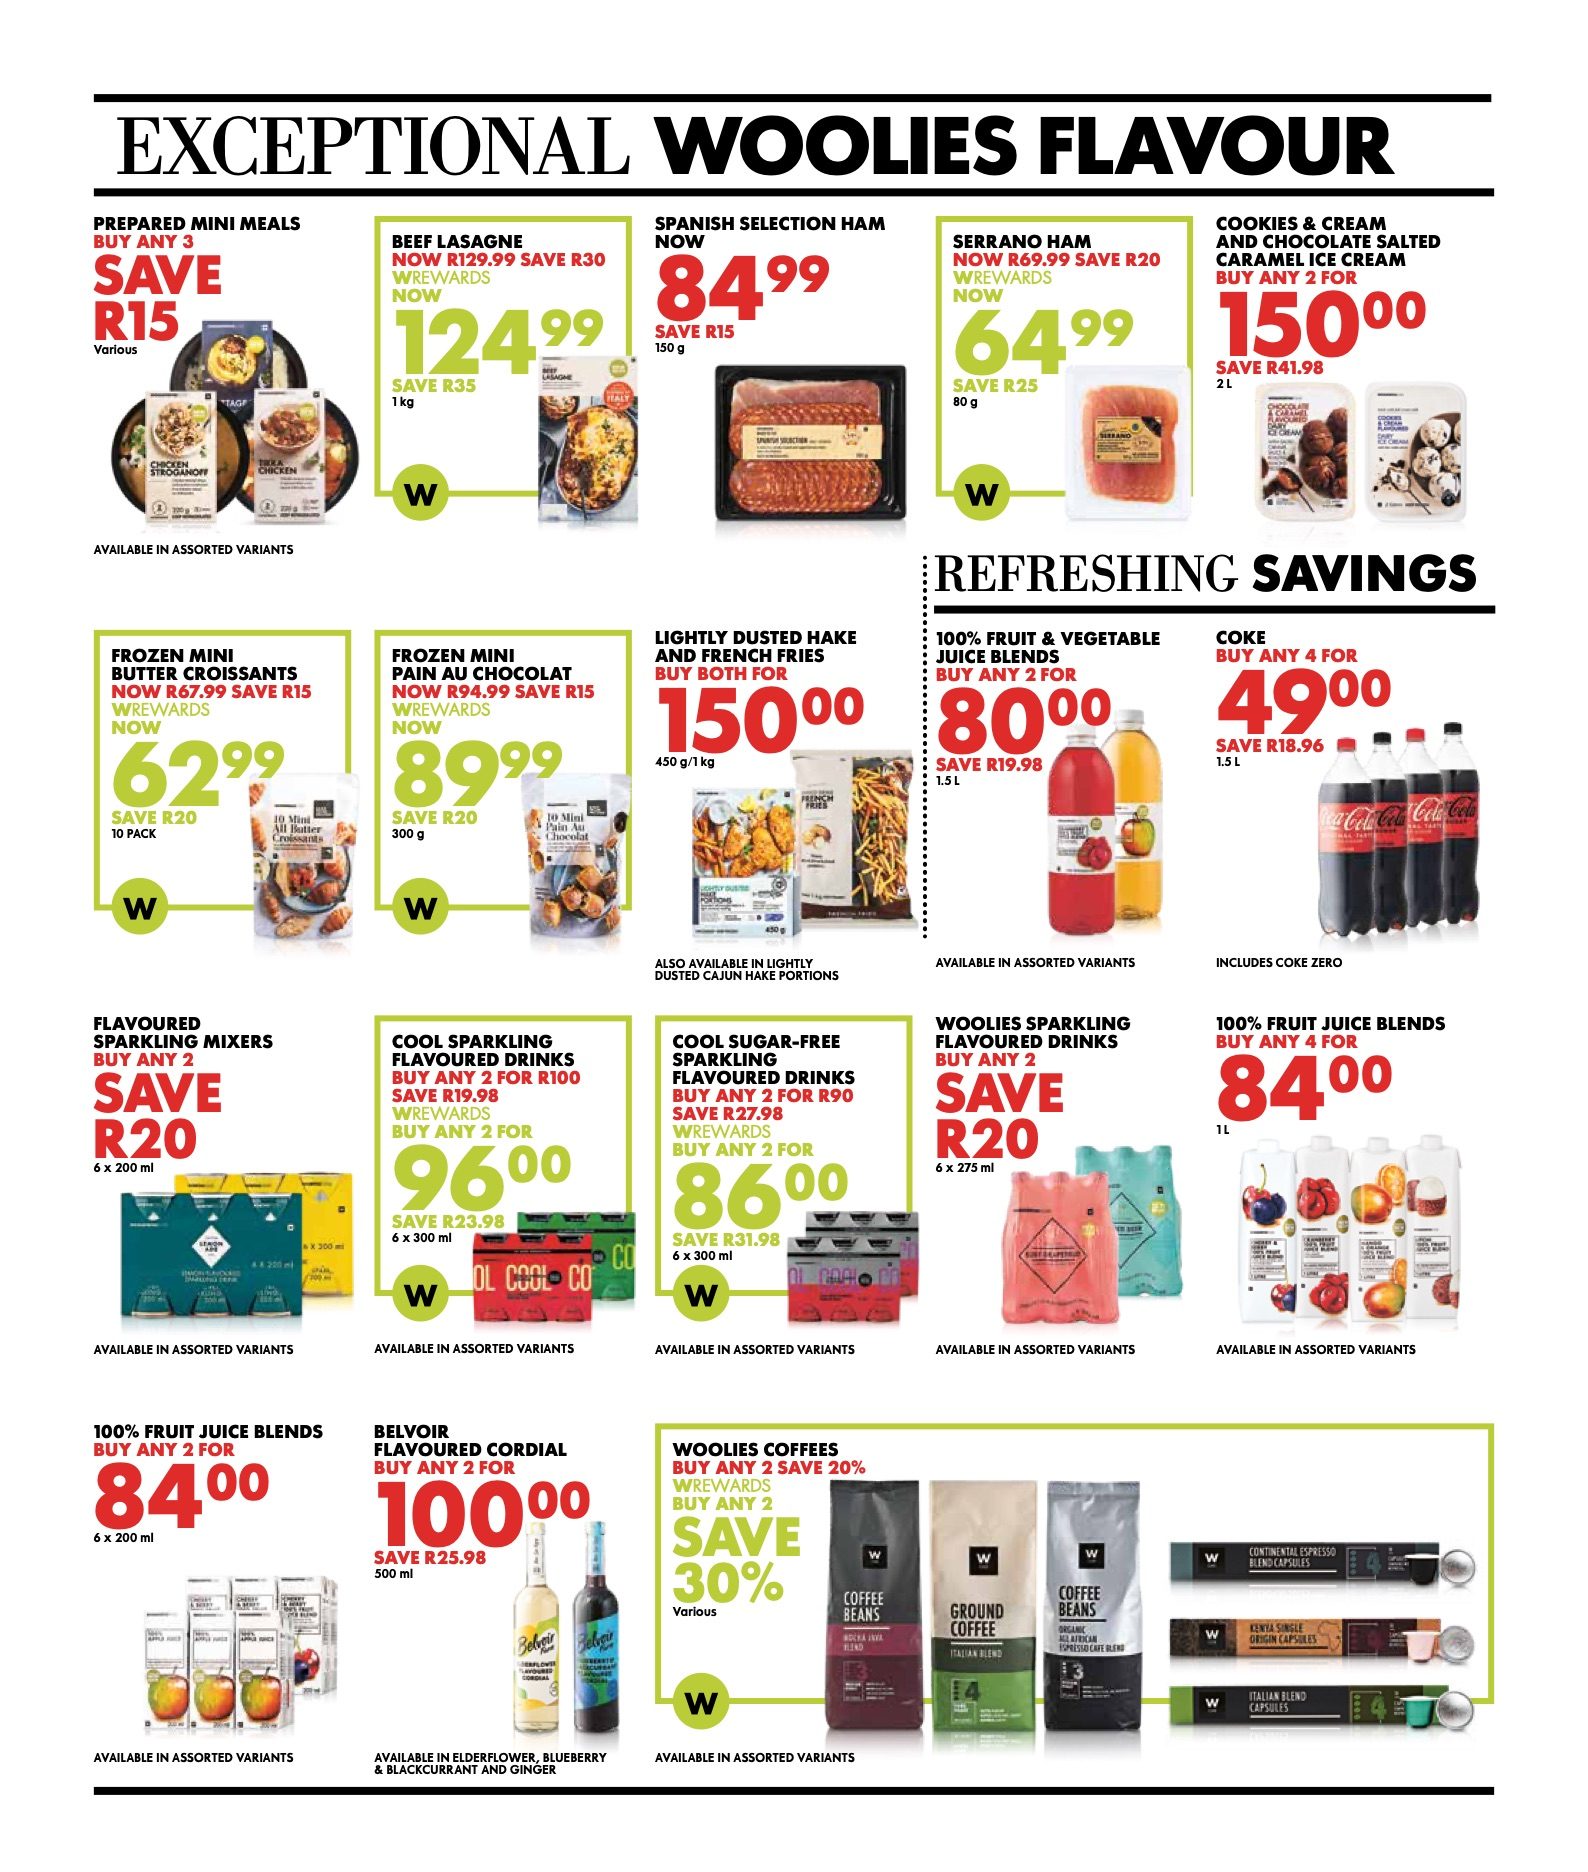 Woolworths Specials 20 June 2022 Woolworths Catalogue Woolies 2022